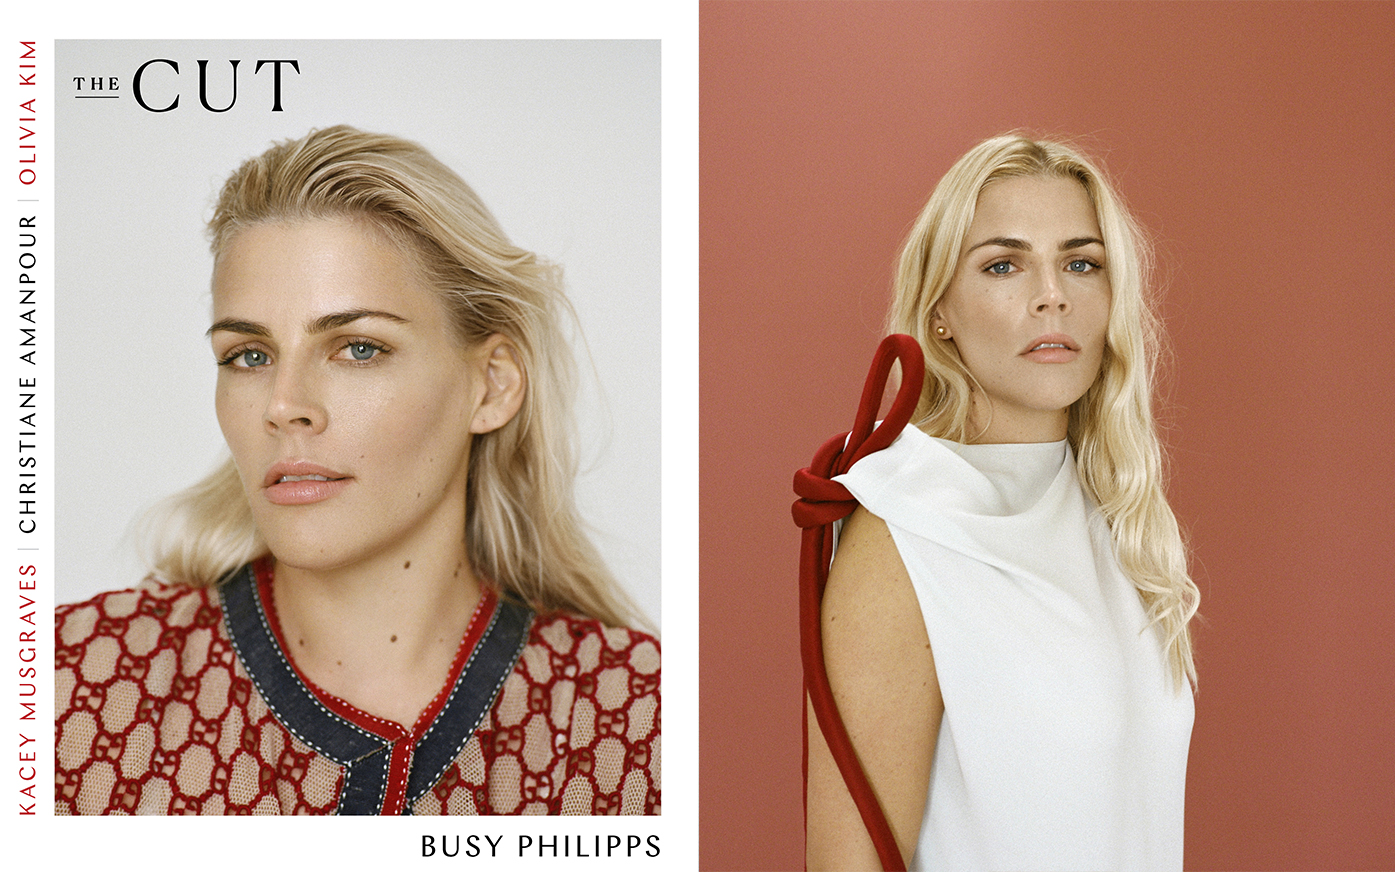 The Cut / Busy Philipps